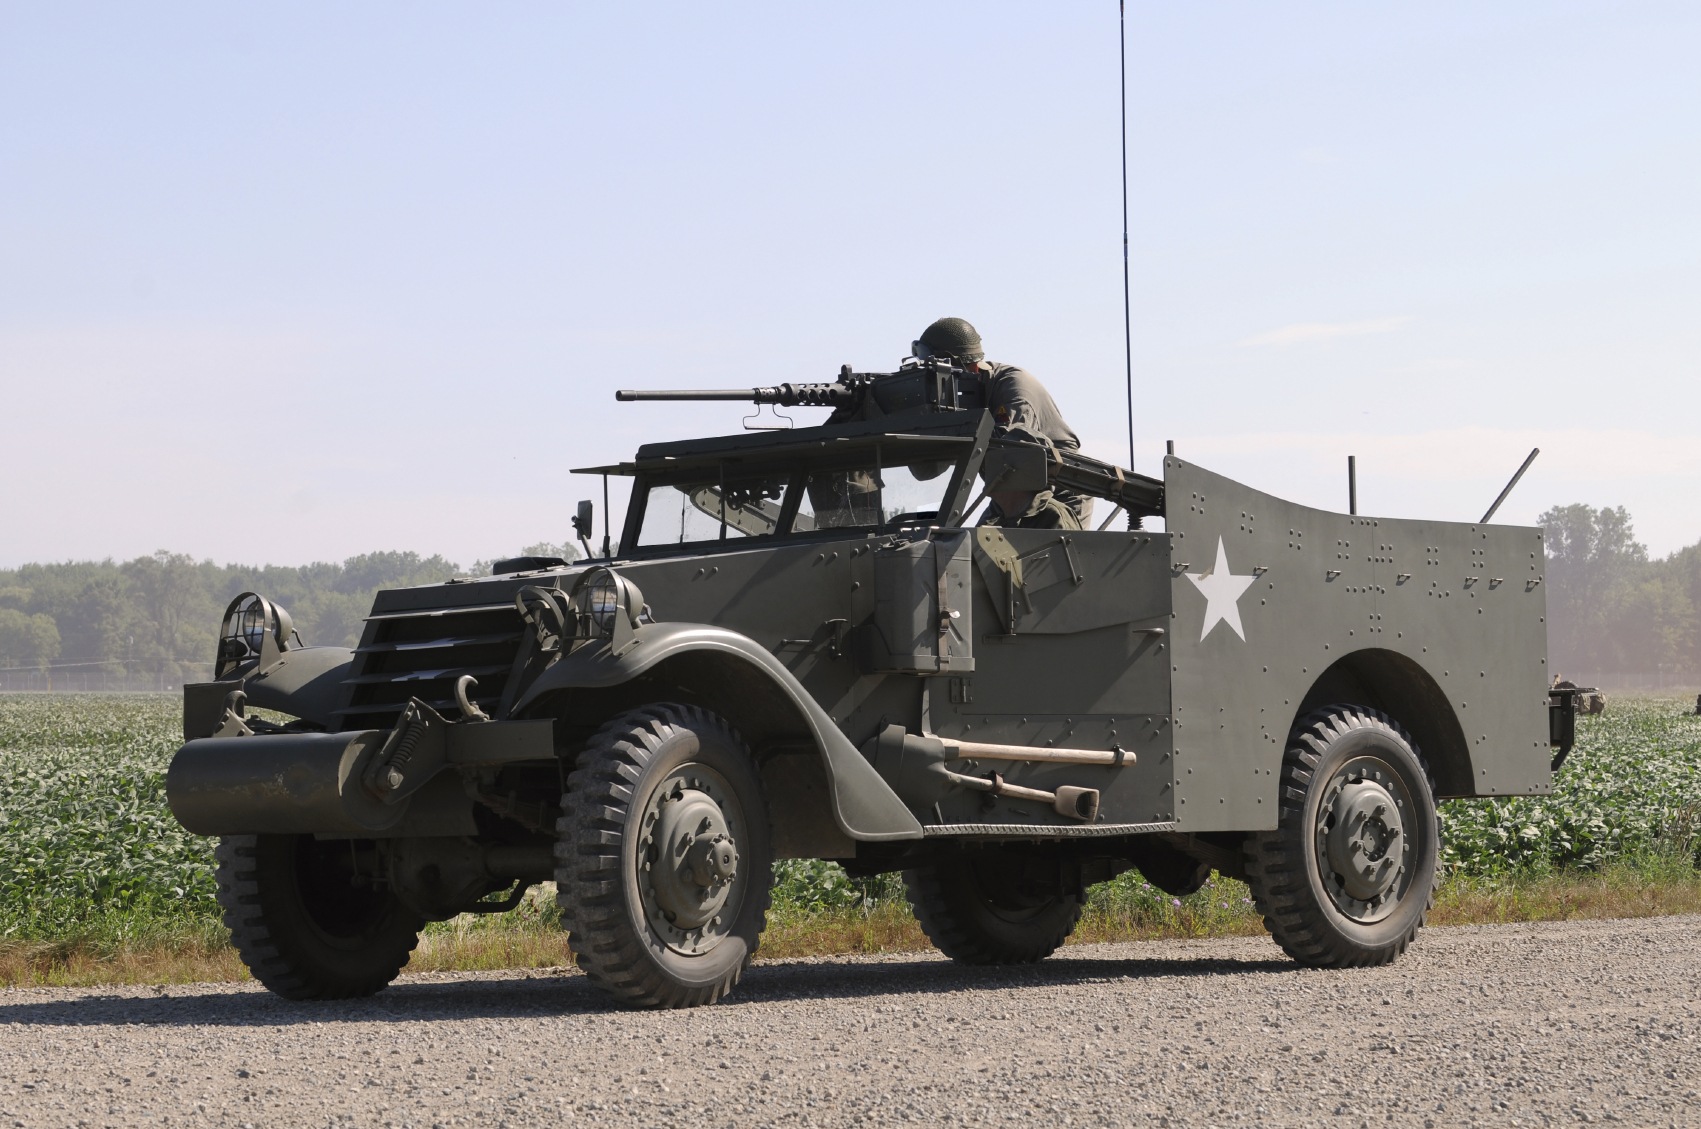 military-vehicle-enthusiasts-get-25-insurance-discount-the